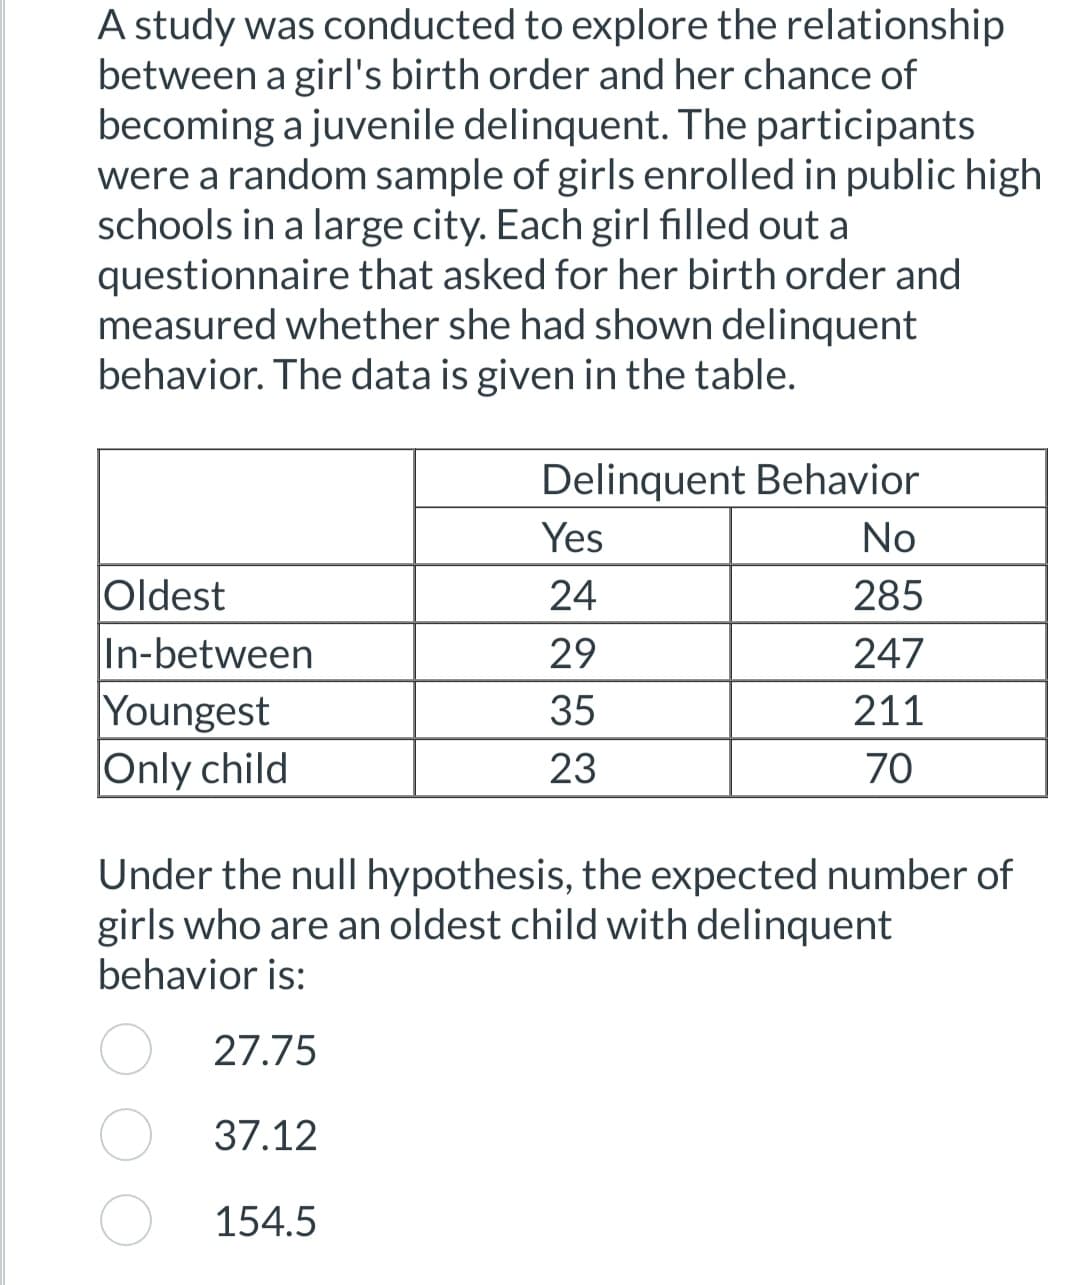 A study was conducted to explore the relationship
between a girl's birth order and her chance of
becoming a juvenile delinquent. The participants
were a random sample of girls enrolled in public high
schools in a large city. Each girl filled out a
questionnaire that asked for her birth order and
measured whether she had shown delinquent
behavior. The data is given in the table.
Oldest
In-between
Youngest
Only child
Delinquent Behavior
No
285
247
211
70
154.5
Yes
24
29
35
23
Under the null hypothesis, the expected number of
girls who are an oldest child with delinquent
behavior is:
27.75
37.12